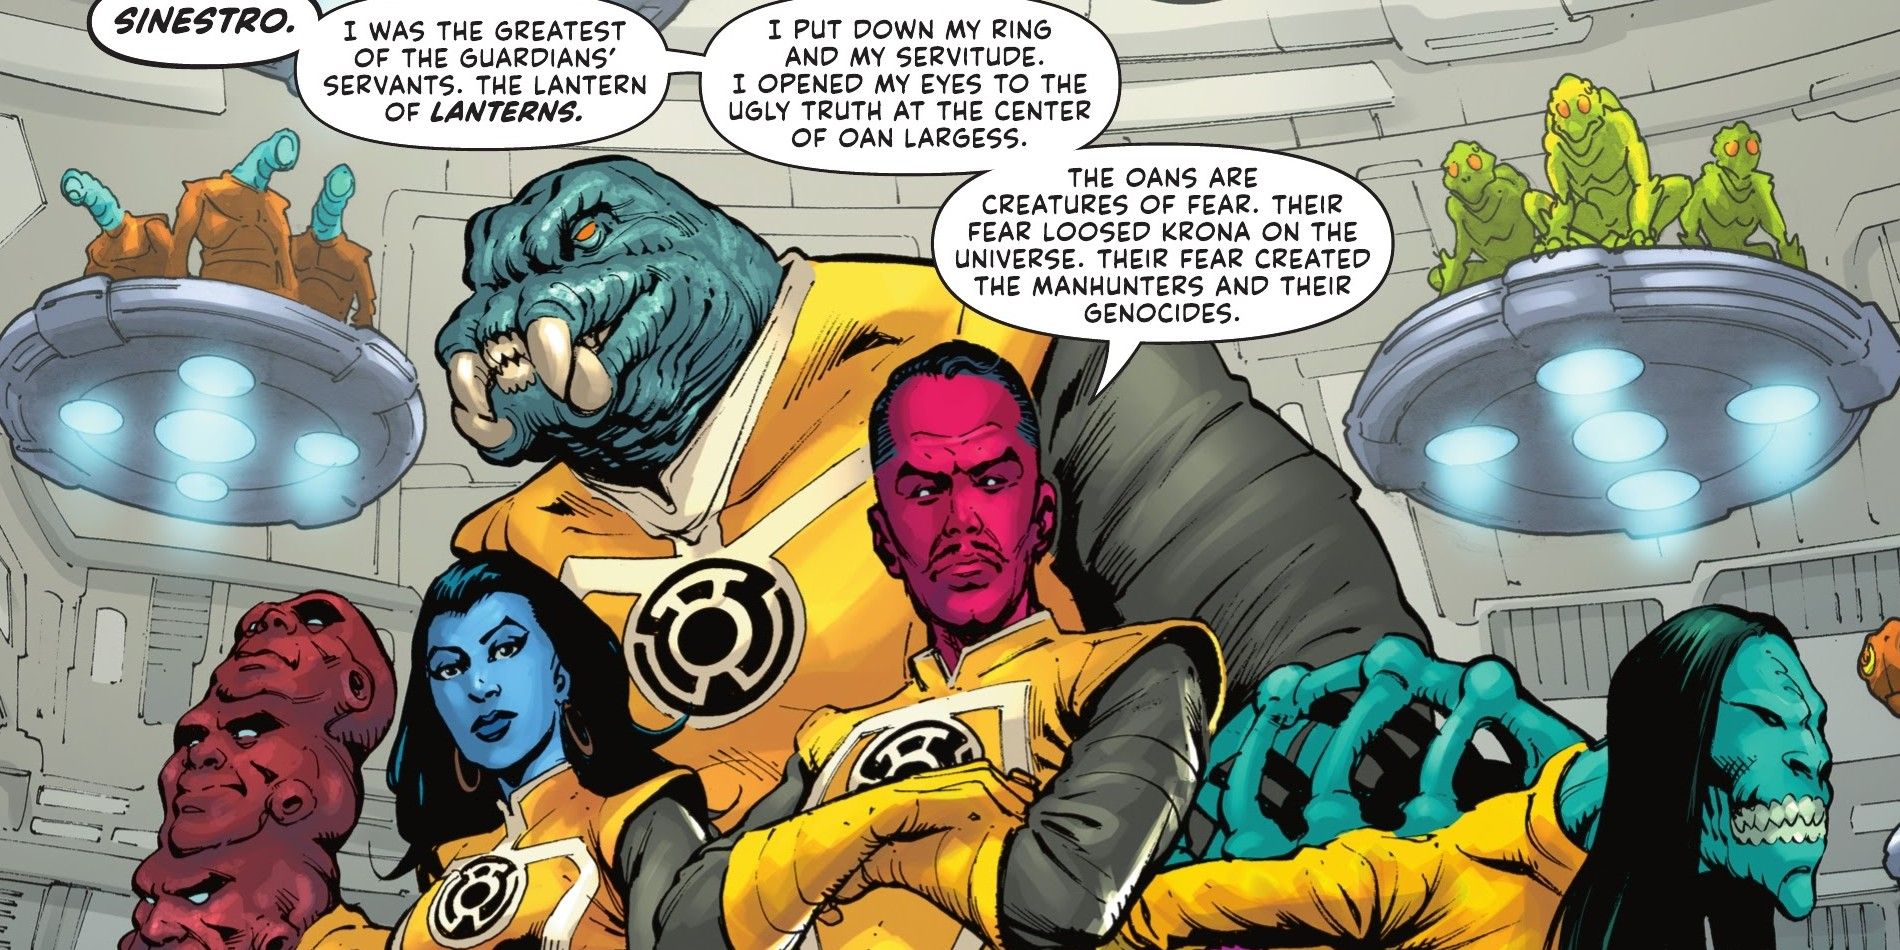 Sinestro and members of the Sinestro Corps from DC Comics